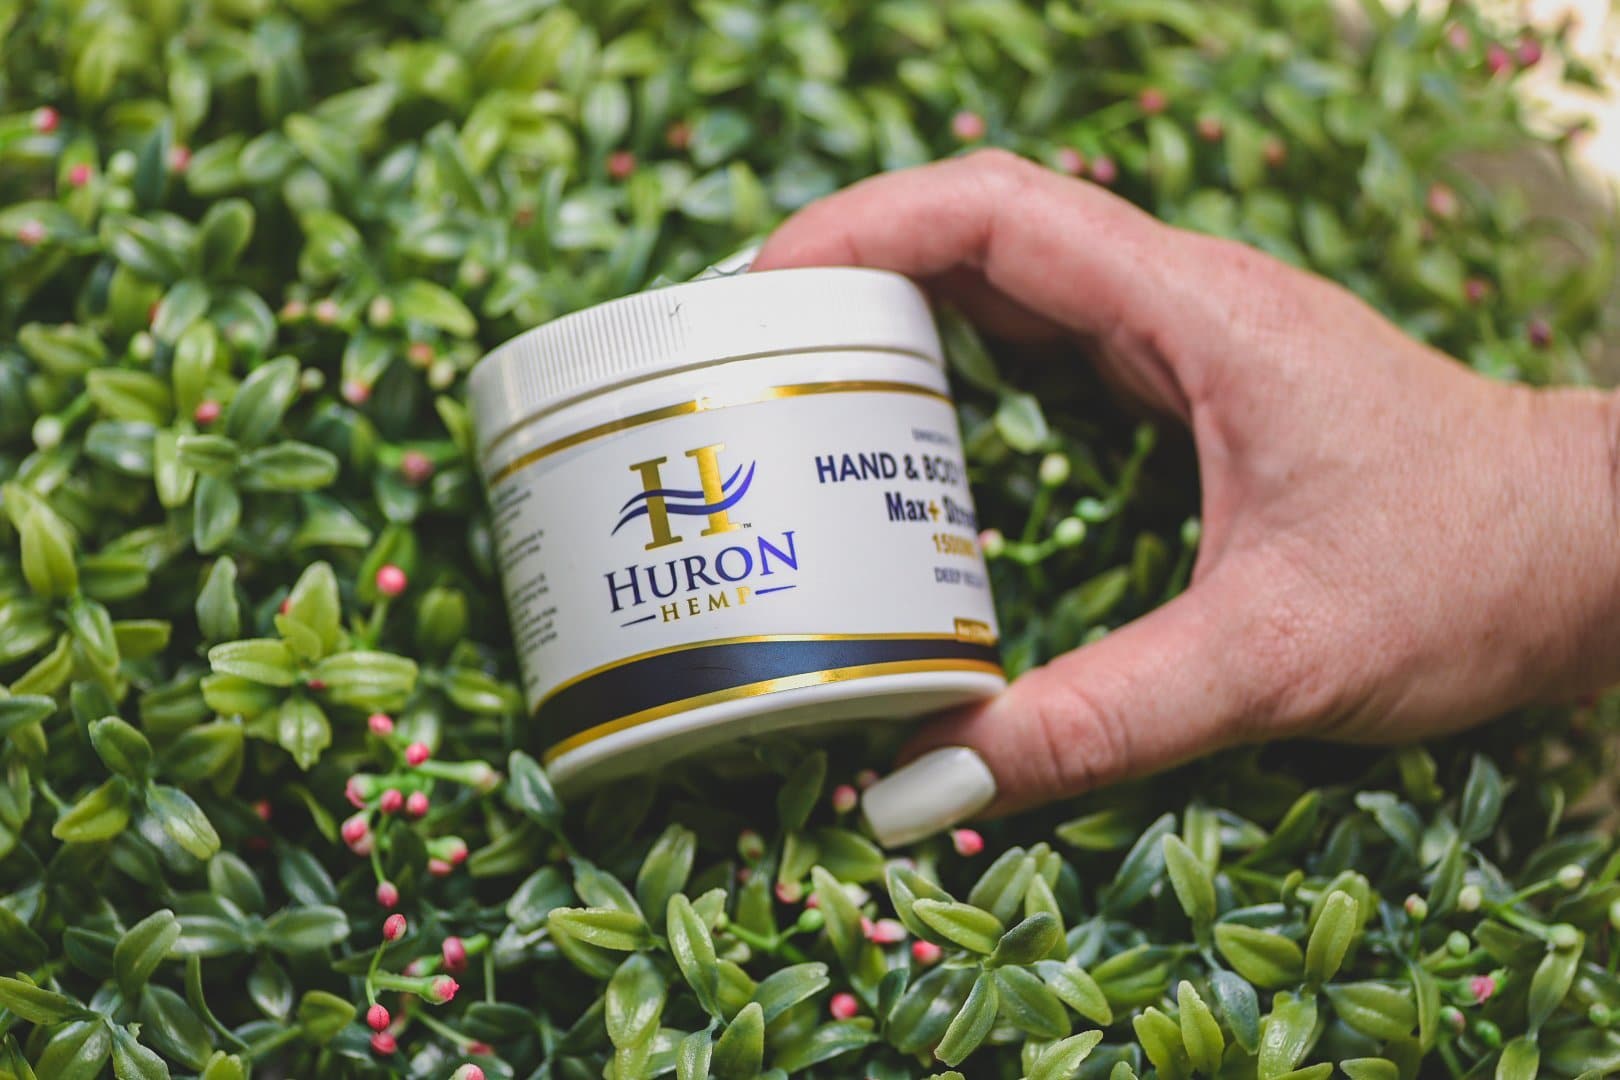 Huron Hemp Hand and Body Cream 750mg helps with deep relief from pain and inflammation.